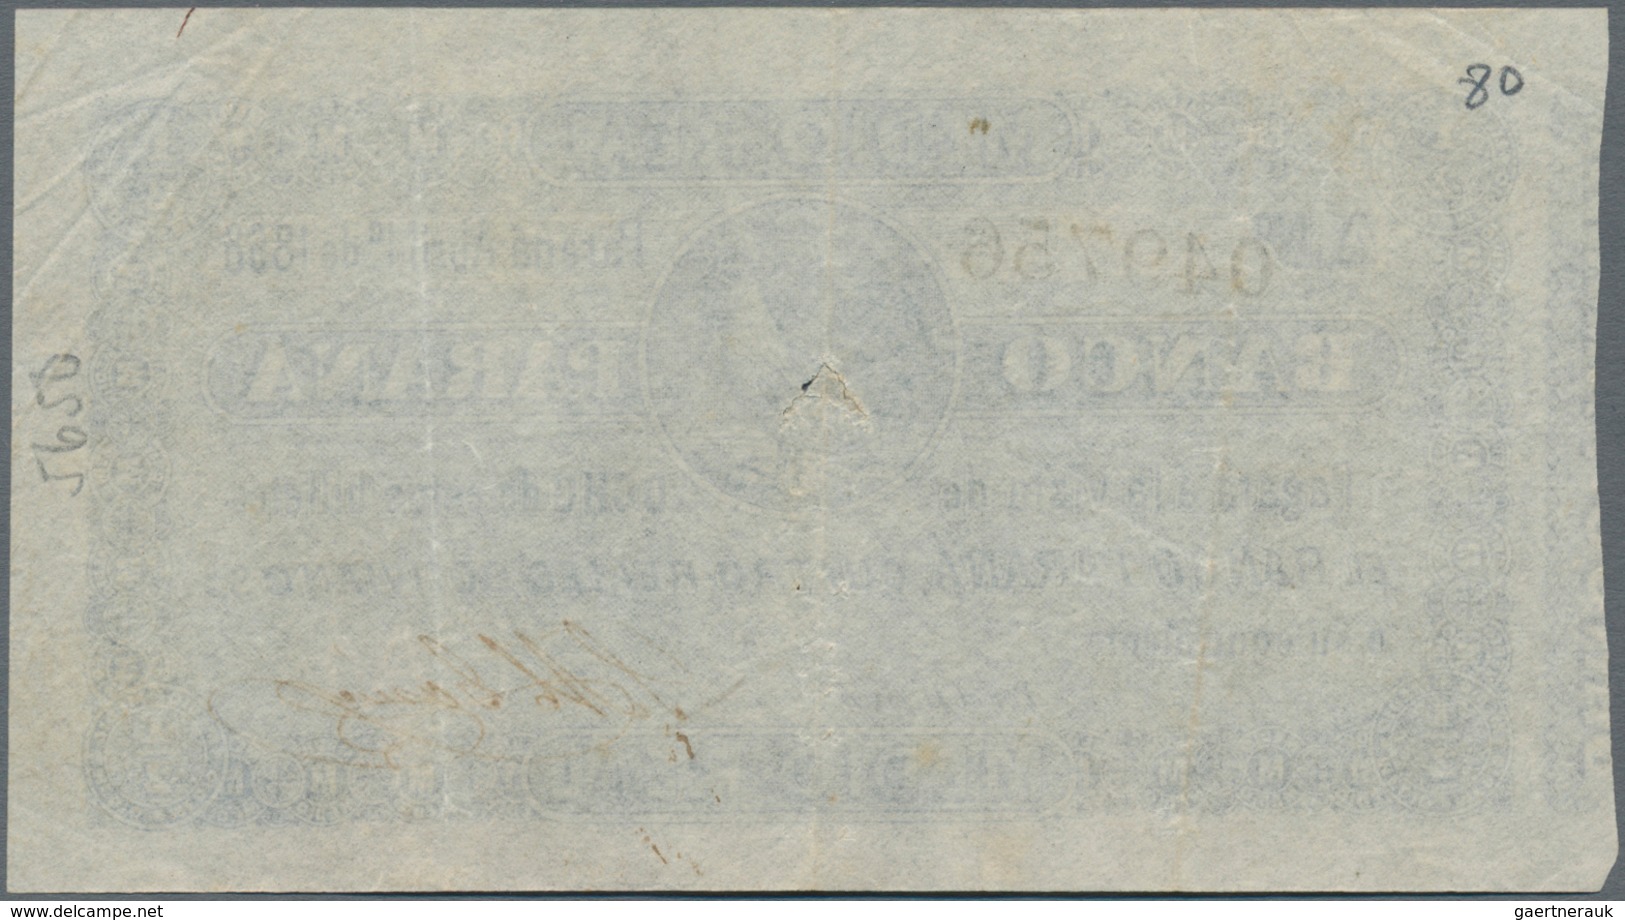 Argentina / Argentinien: Banco Parana 1/2 Real 1868, P.S1811a, Small Tear At Center, Some Folds. Con - Argentina